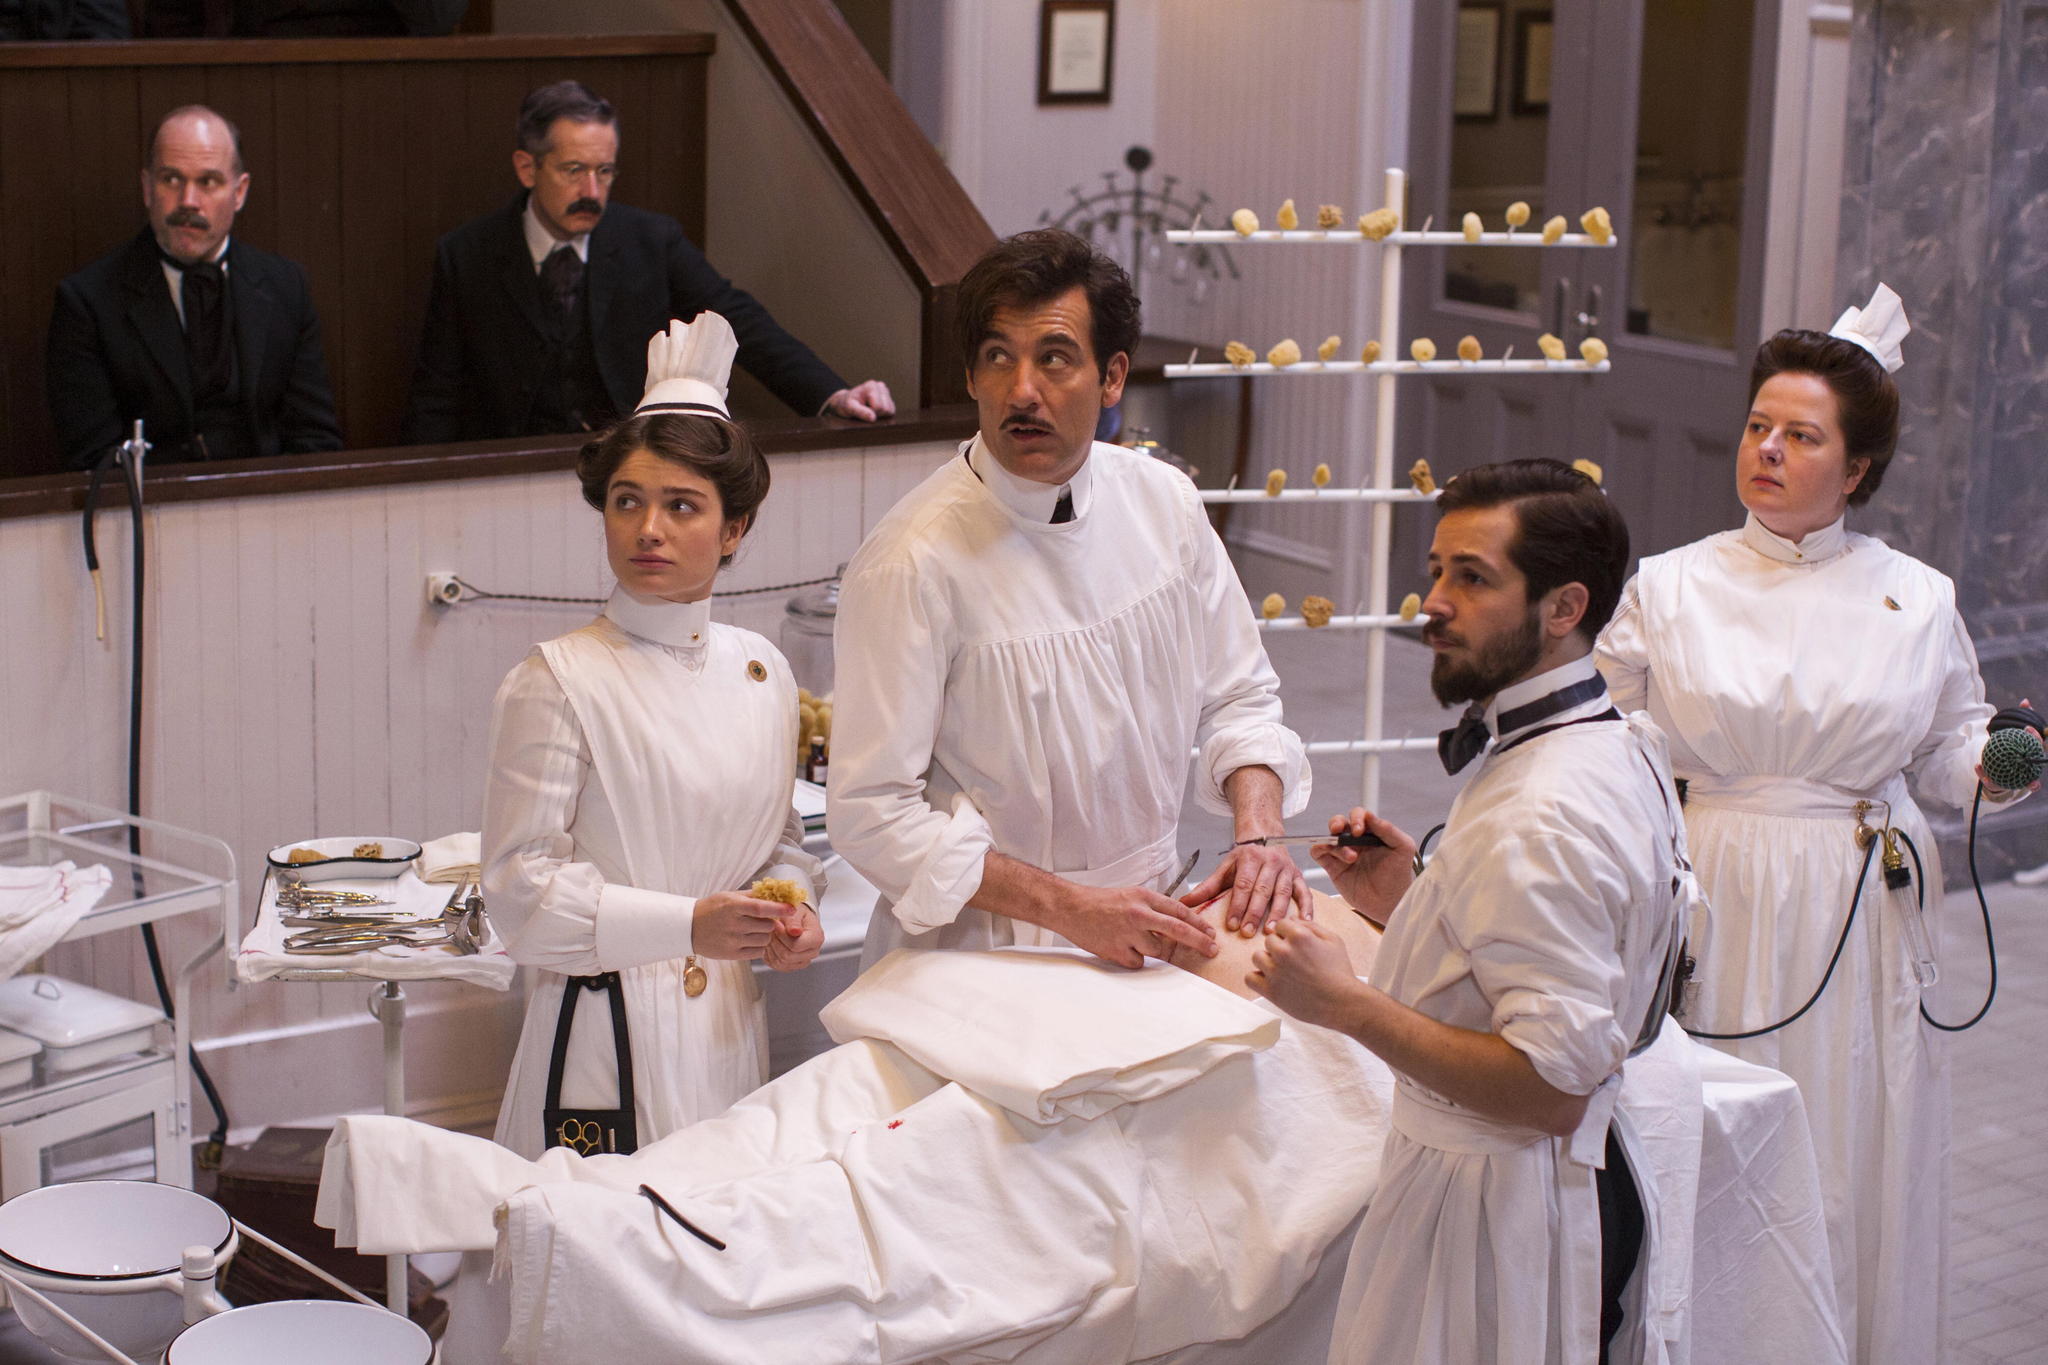 Still of Michael Angarano, Clive Owen, Eve Hewson and Zuzanna Szadkowski in The Knick (2014)